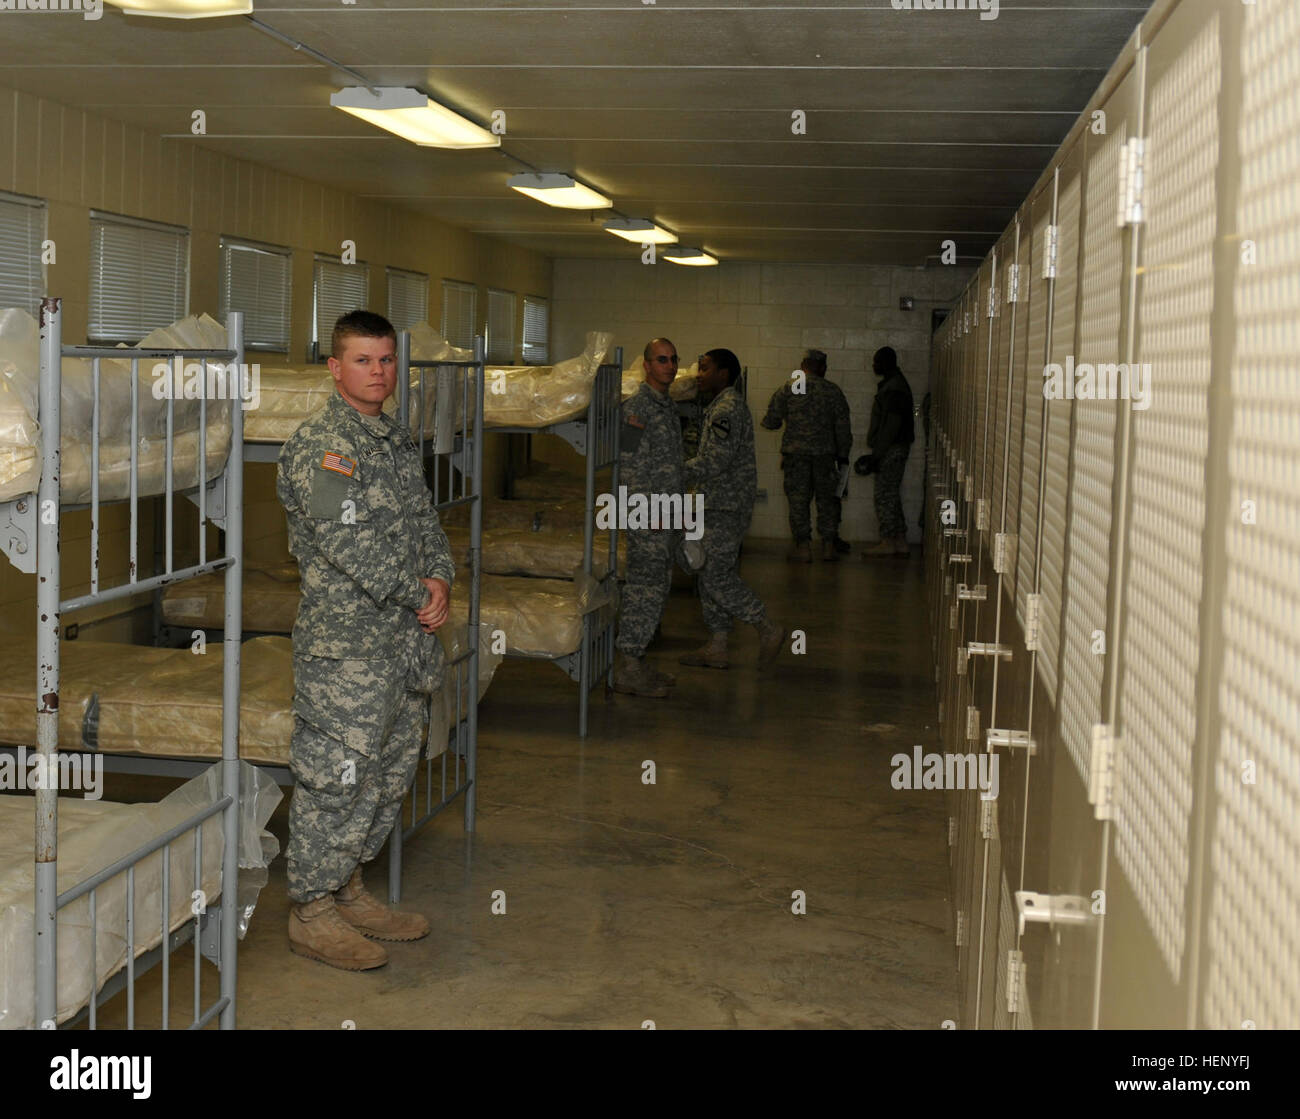 Members of the 2nd Battalion, 82nd Field Artillery Regiment, 3rd Brigade Combat Team “Greywolf,” 1st Cavalry Division, inspect the barracks that will house Soldiers returning from the Ebola virus disease outbreak areas in Africa. Recently, the Department of Defense announced that Fort Hood would be one of several locations for the 21-day controlled monitoring station for Soldiers and civilians returning from those areas. In addition to the barracks, outfitted with free Wi-Fi, the monitored Soldiers will have their own gym, recreation area – equipped with Internet, video games, cable television Stock Photo